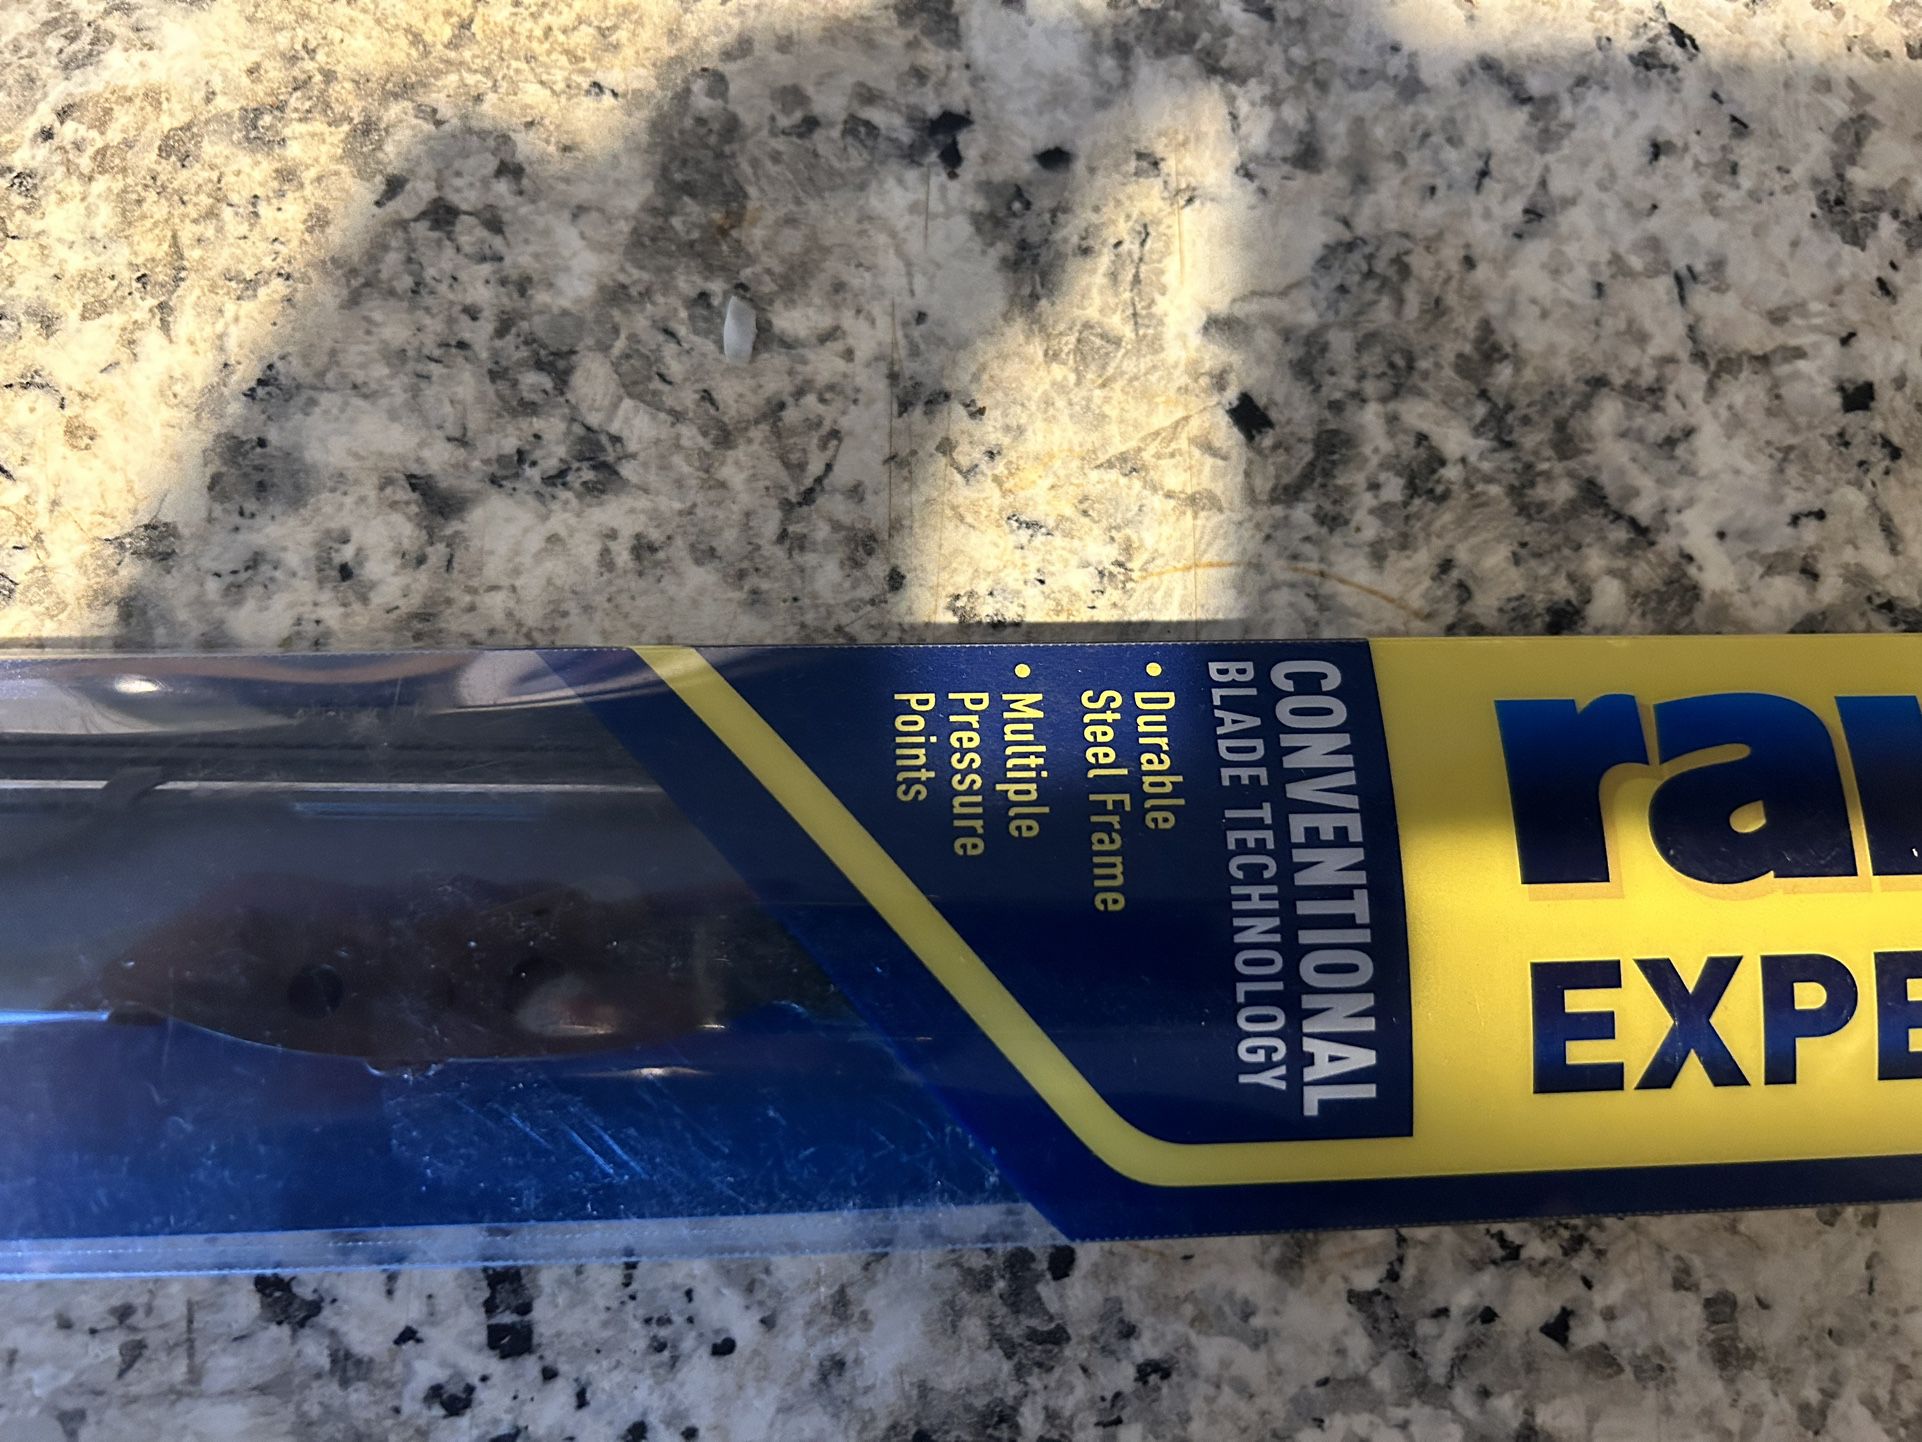 Extendable Windshield Cleaner for Sale in Glendale, CA - OfferUp